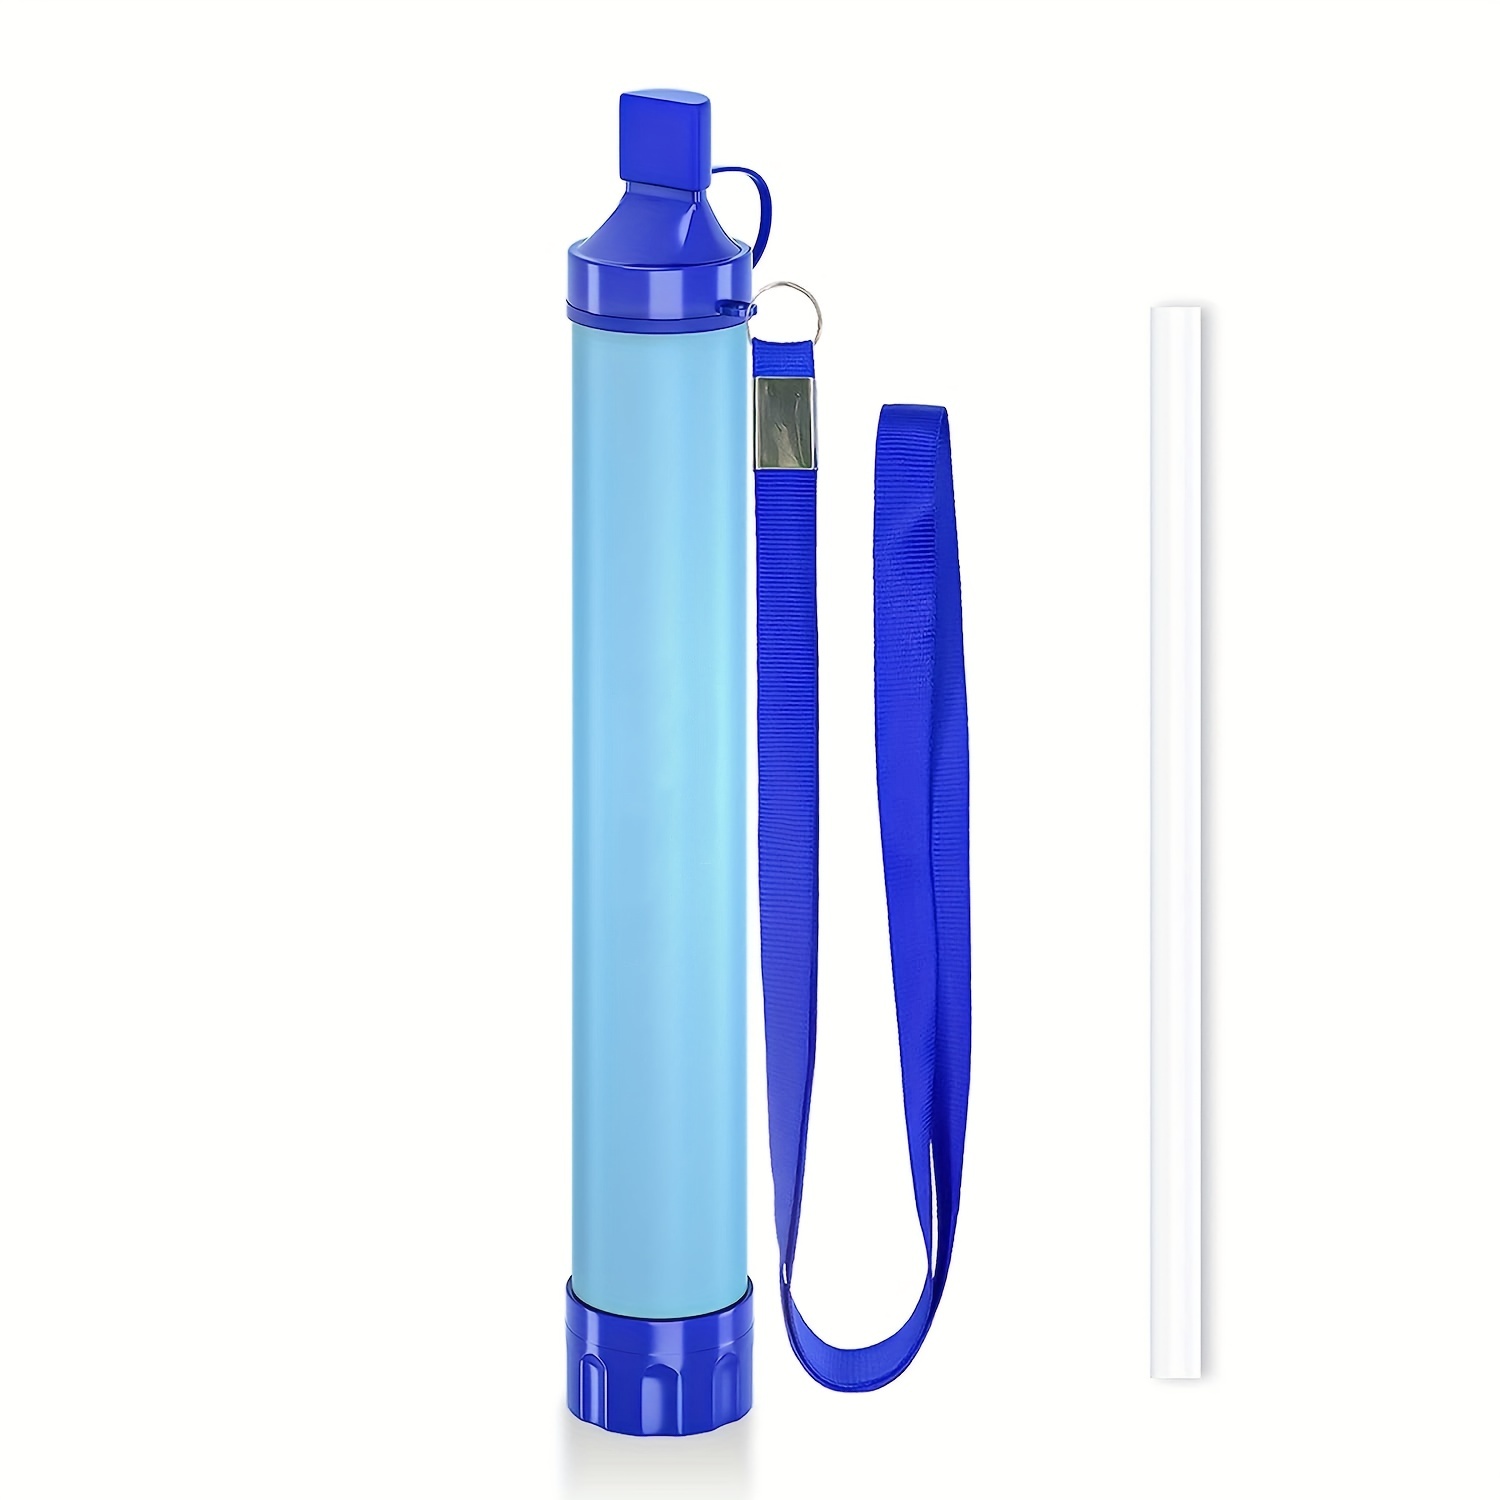 OWIARA Water Bottle with Filter for Drinking, 26 Ounces 3-Stage Water  Filter Bottle for Outdoor Travel Camping Moutaining Backpacking Hiking  (Light